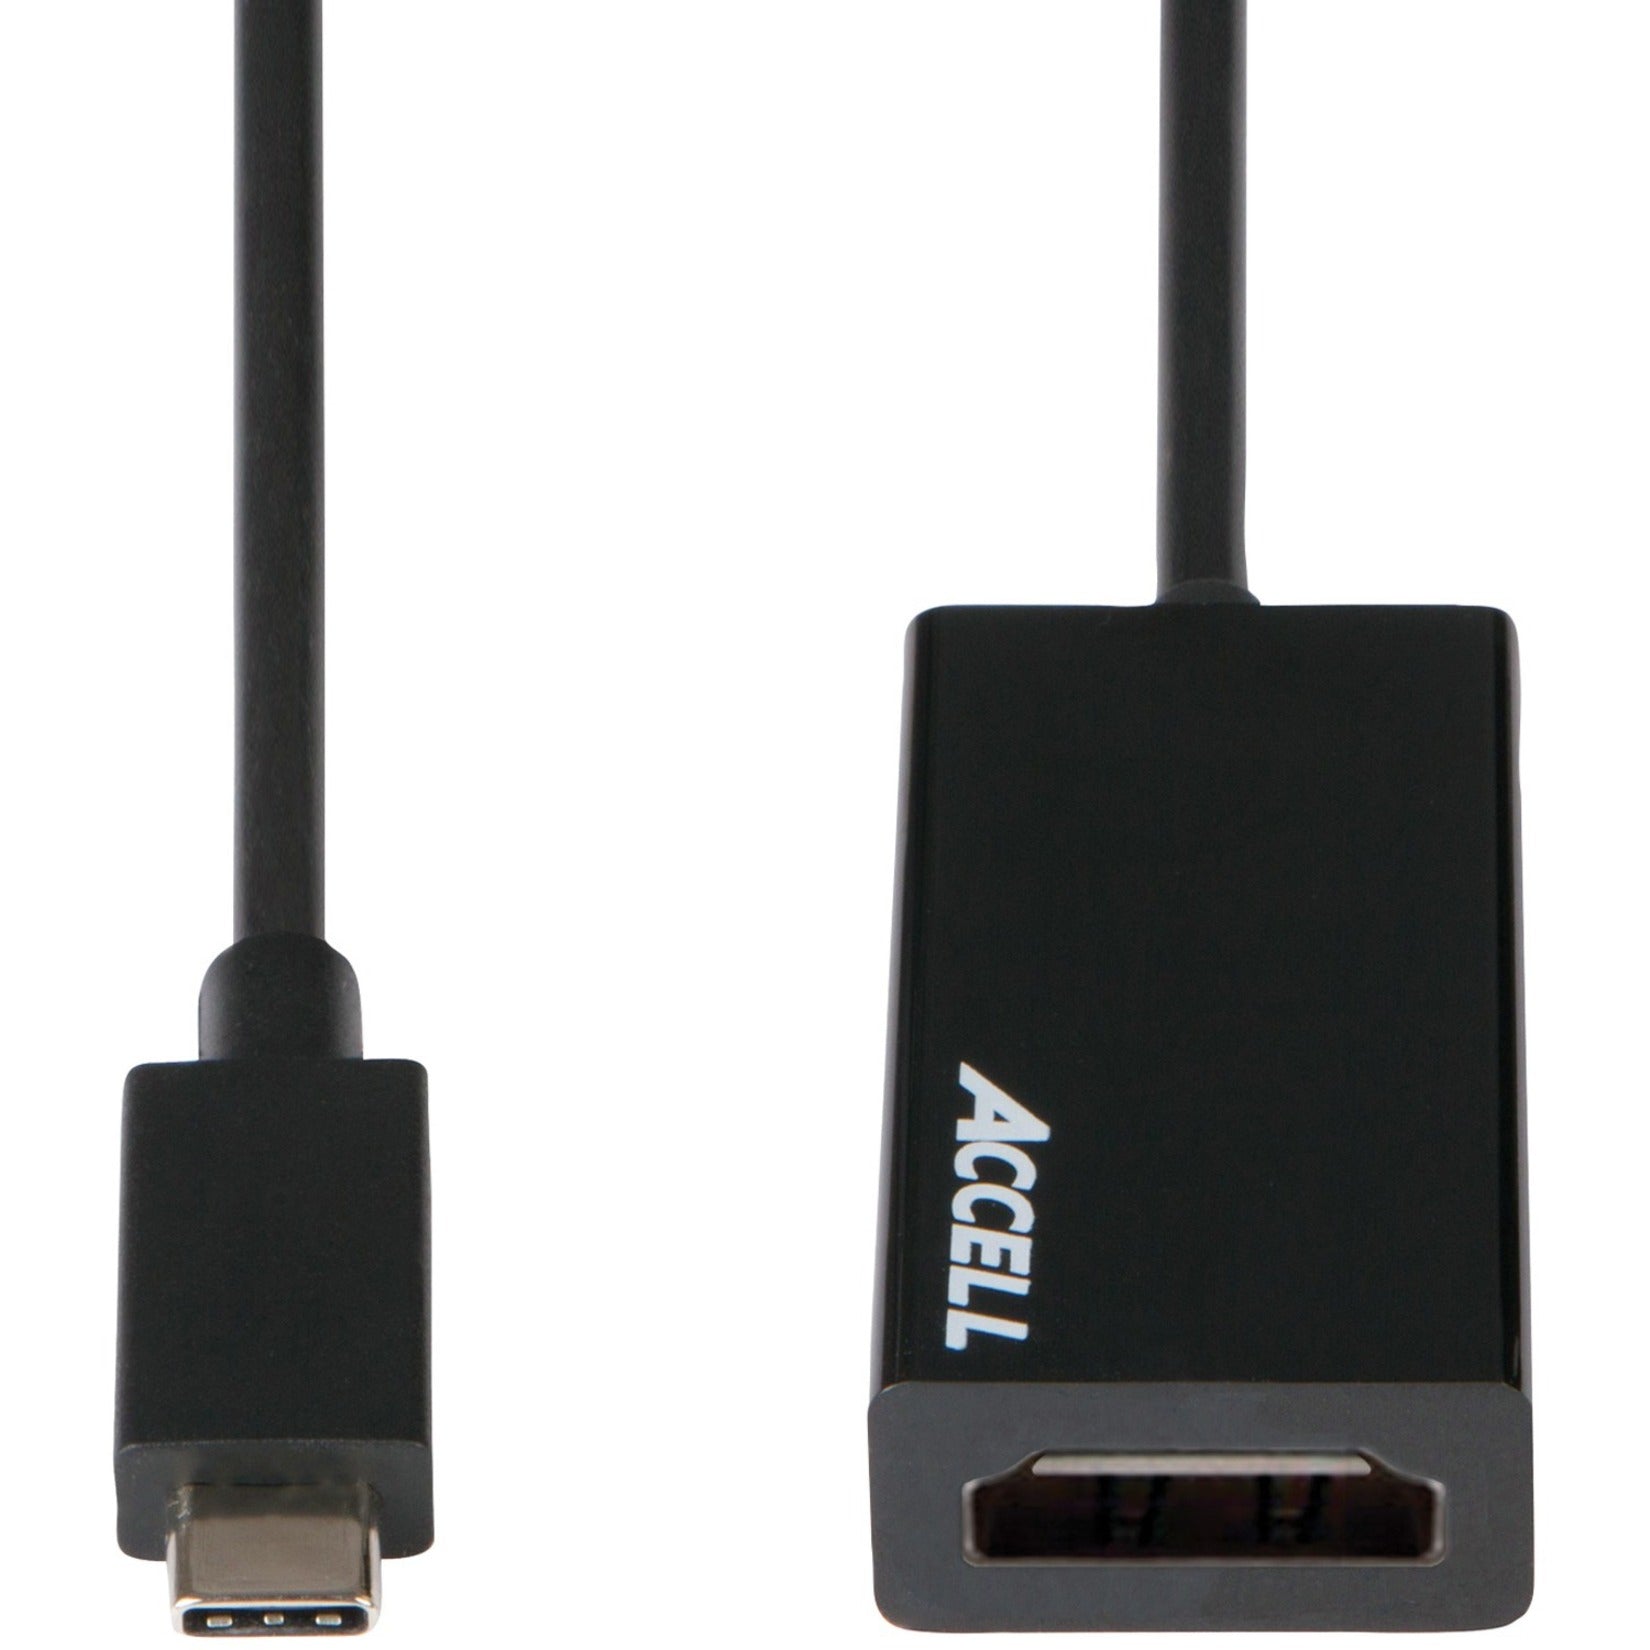 Accell U187B-005B USB-C to HDMI 2.0 Adapter, Connect Your USB-C Device to HDMI Display